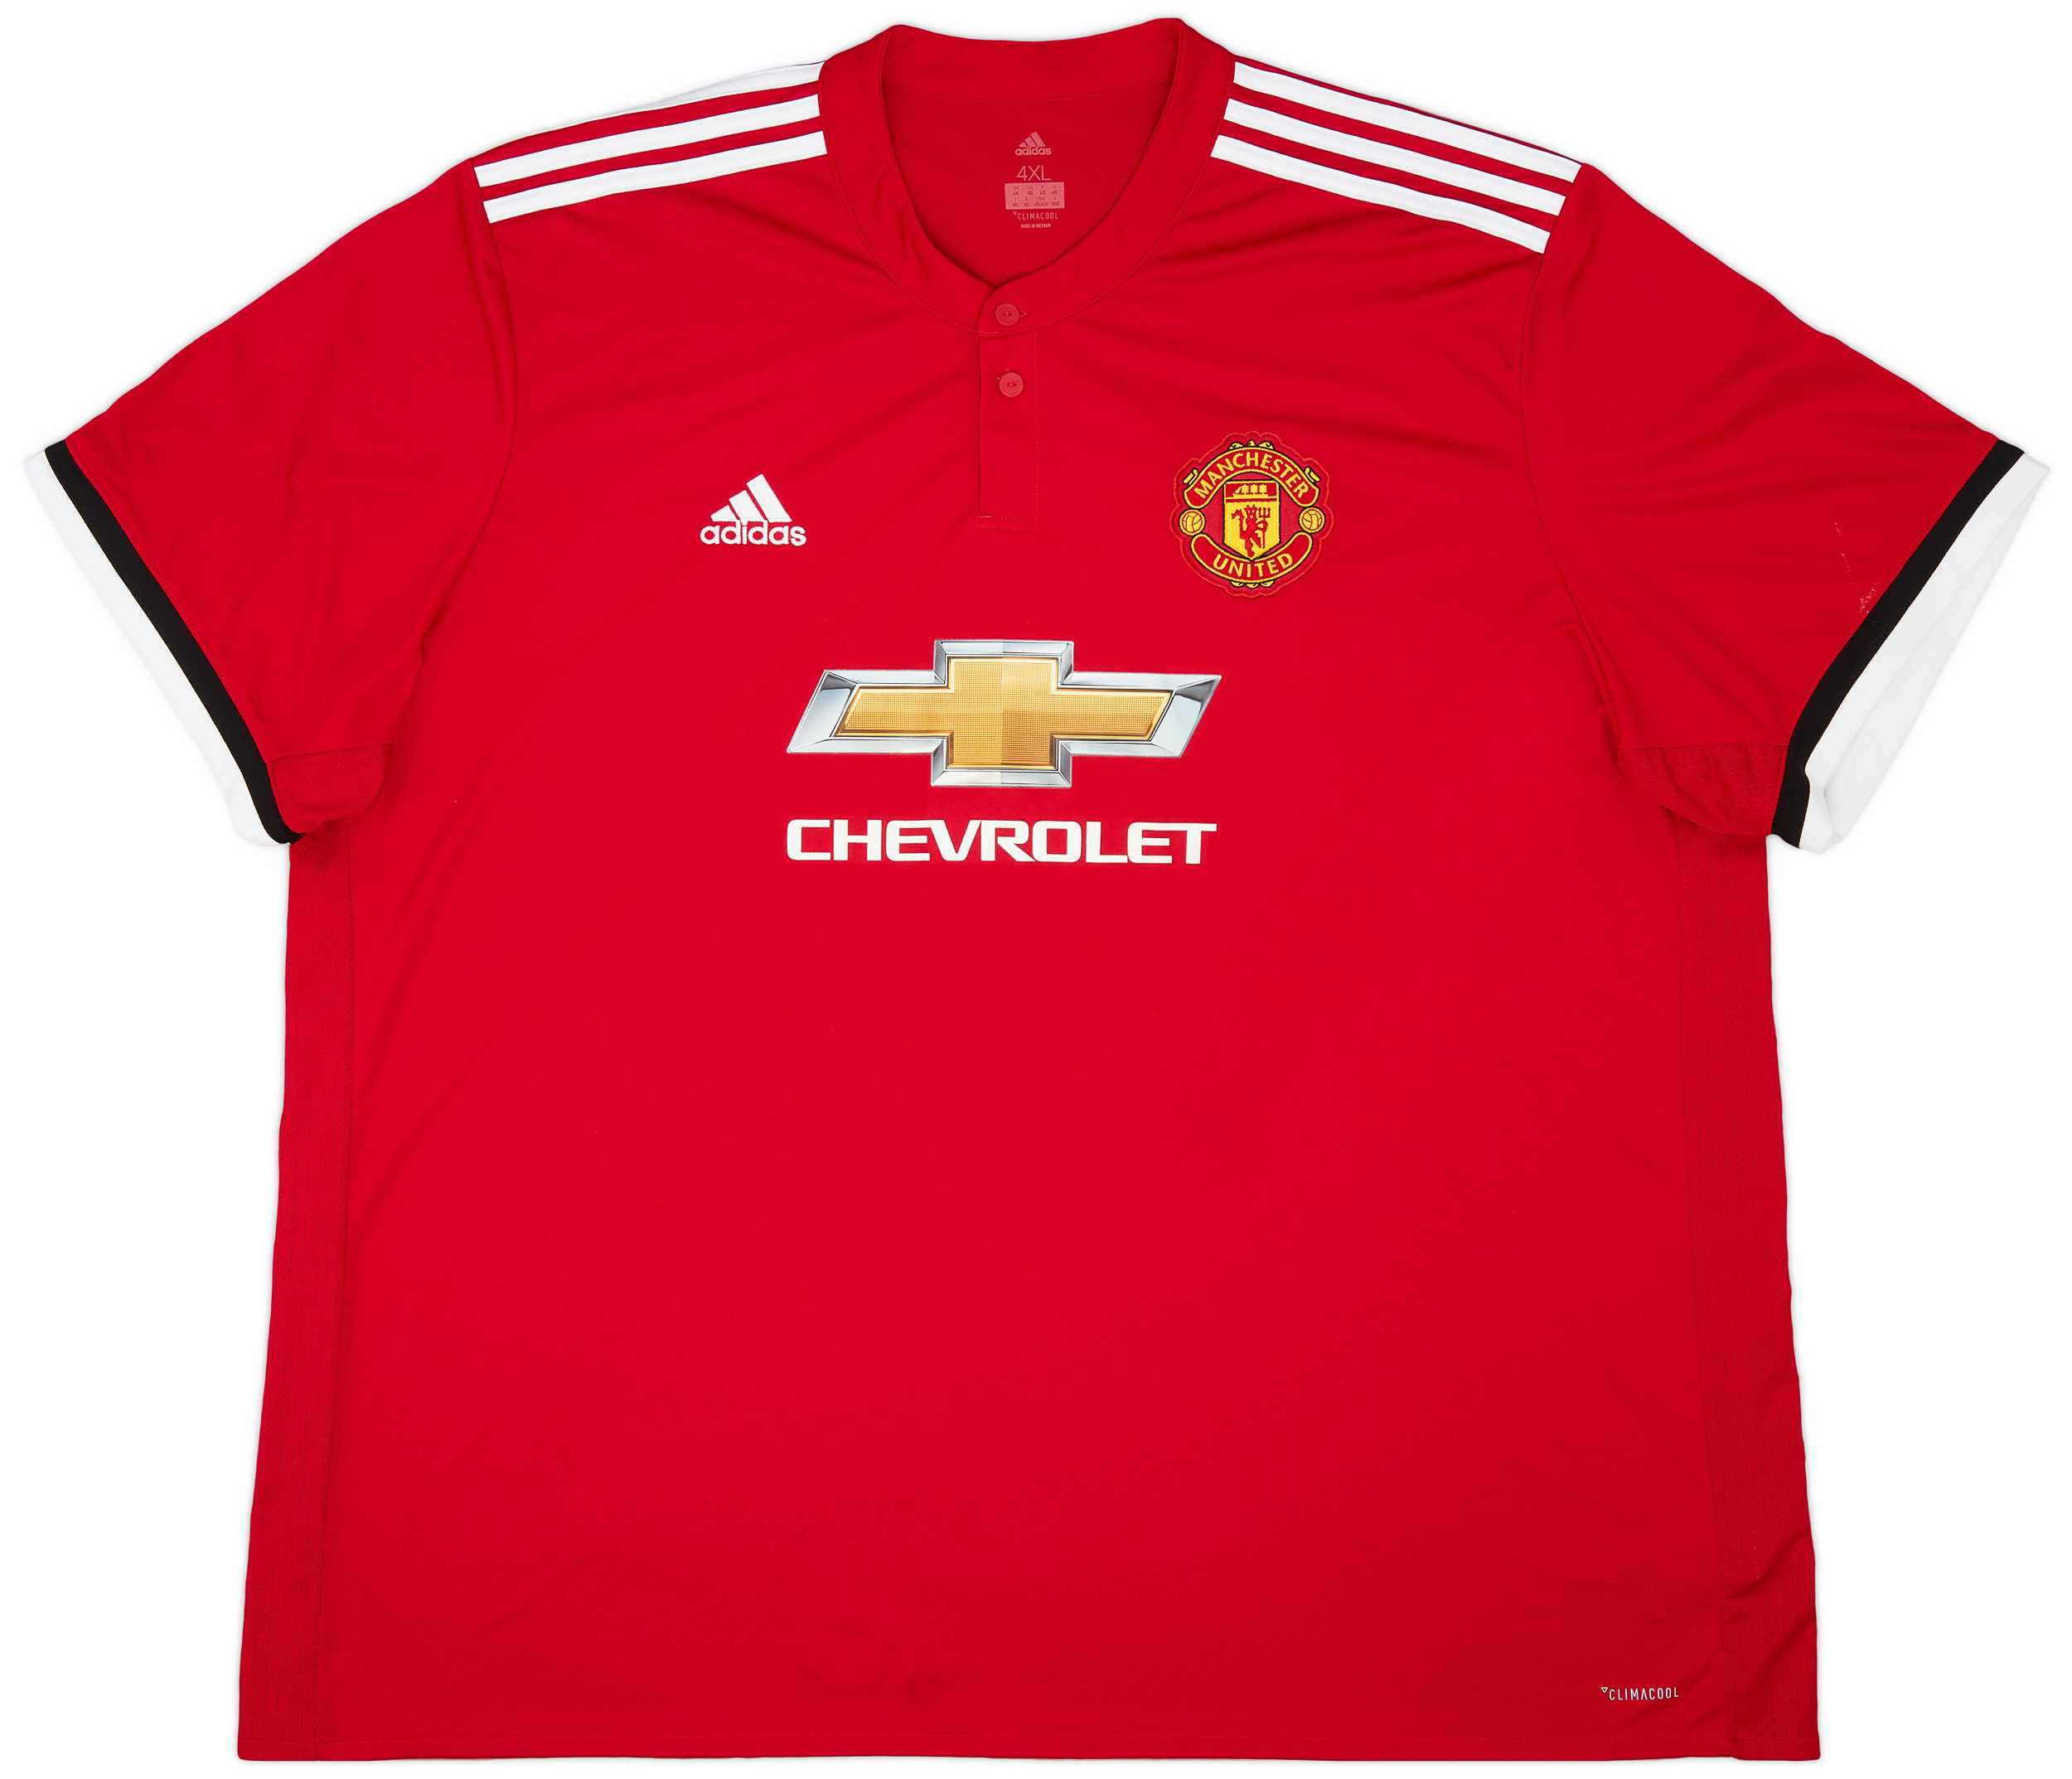 2017-18 Manchester United Home Shirt - 9/10 - ()